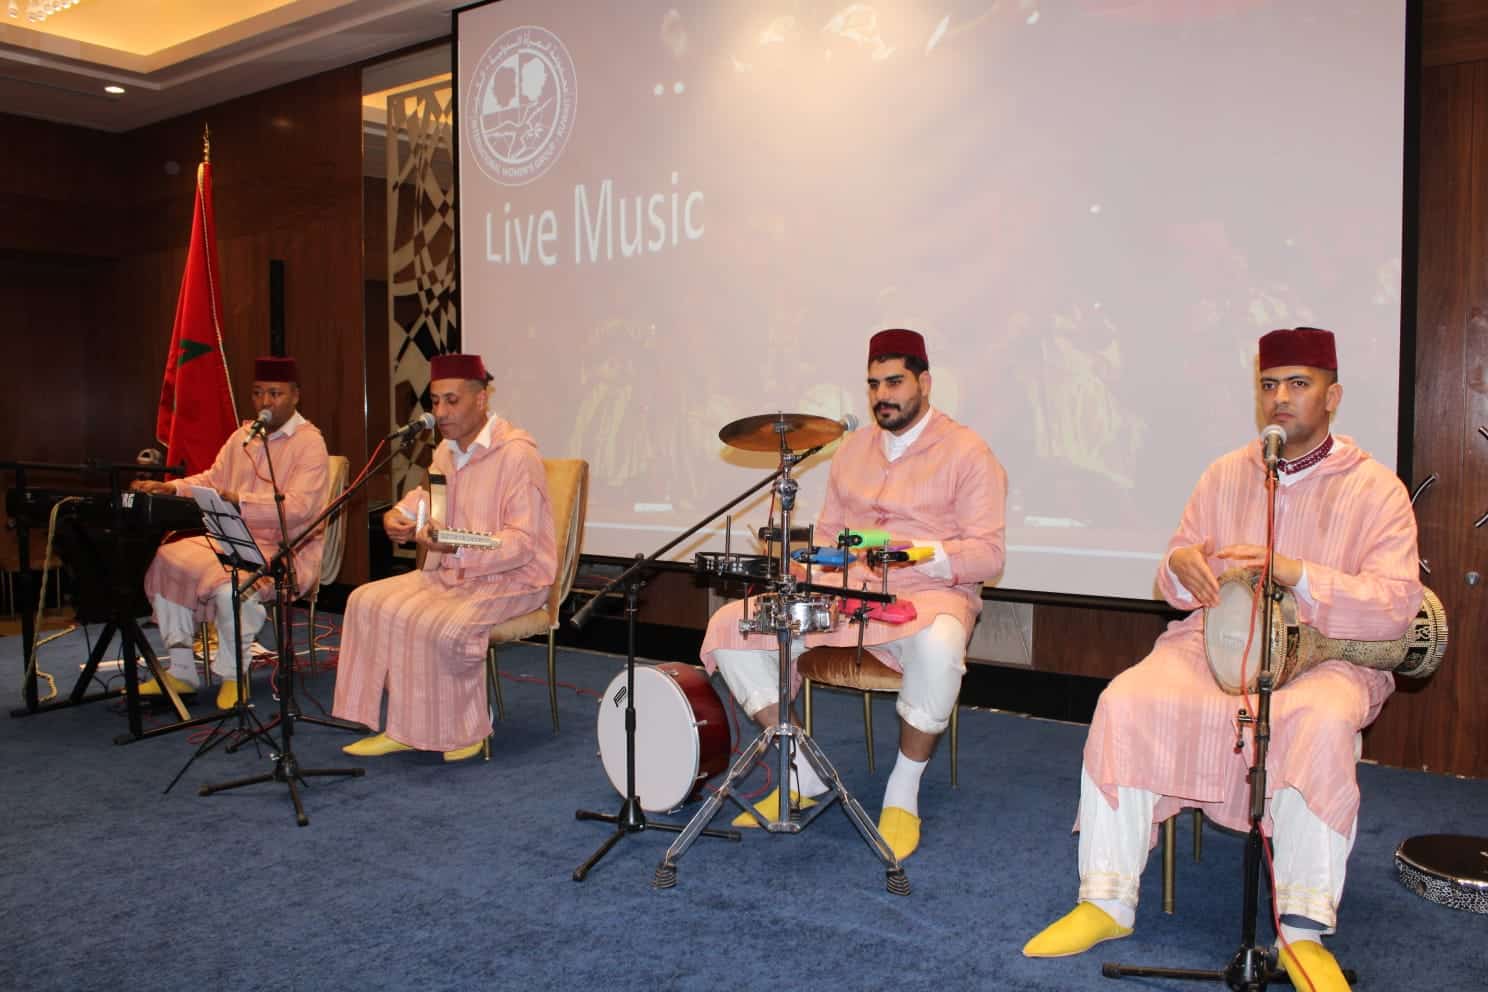 A band plays traditional folklore Moroccan music at the event.